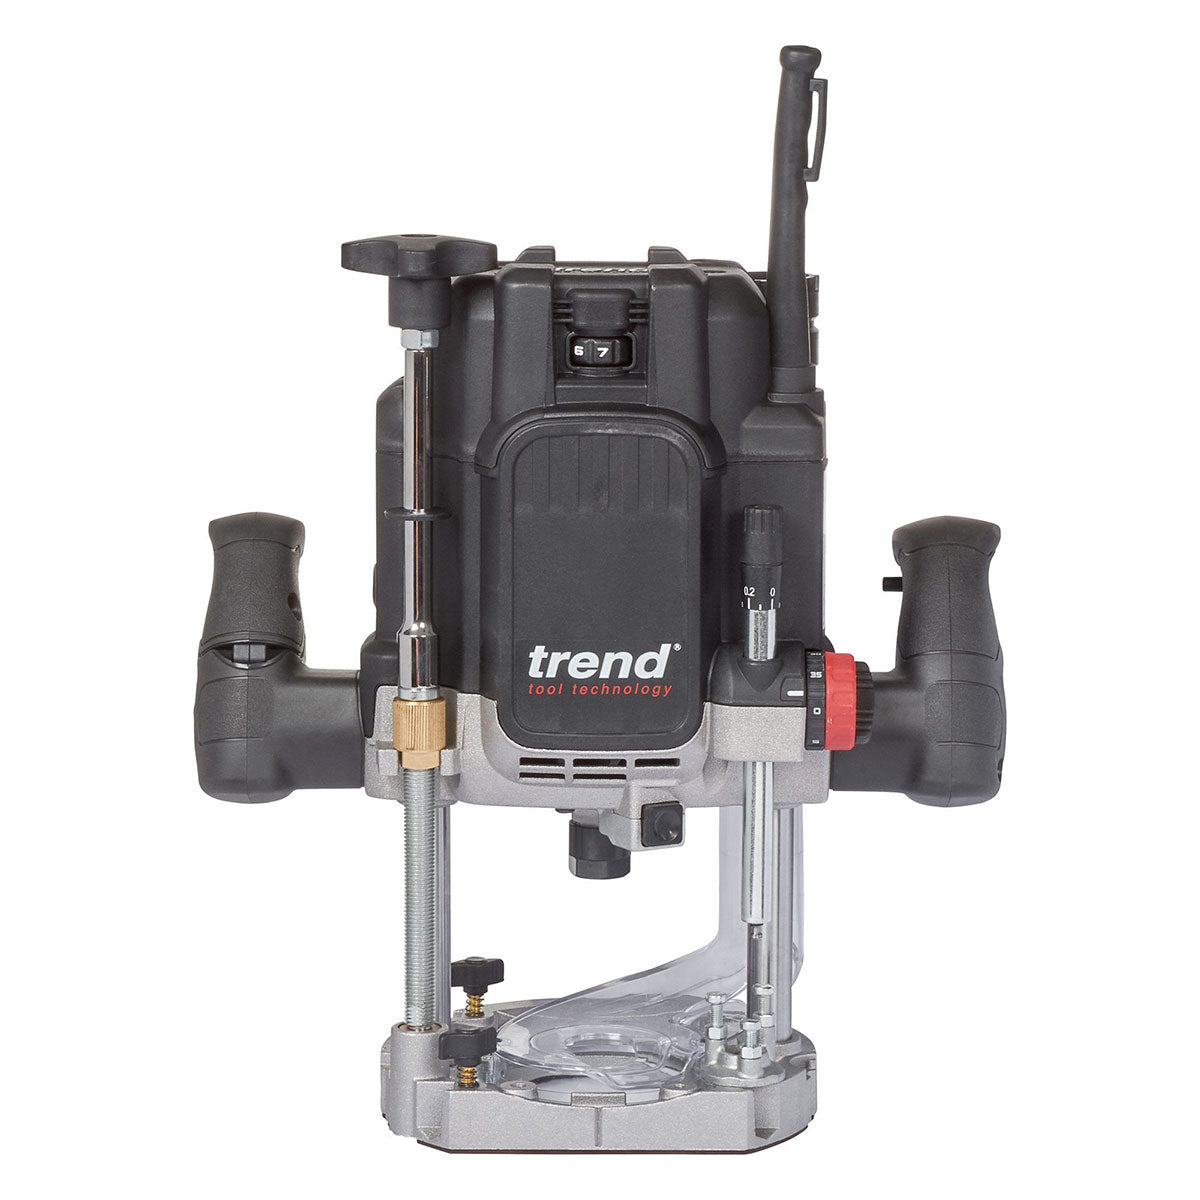 Trend T14EK 1/2in Dual Mode Plunge Router 240V/2300W with Carry Case